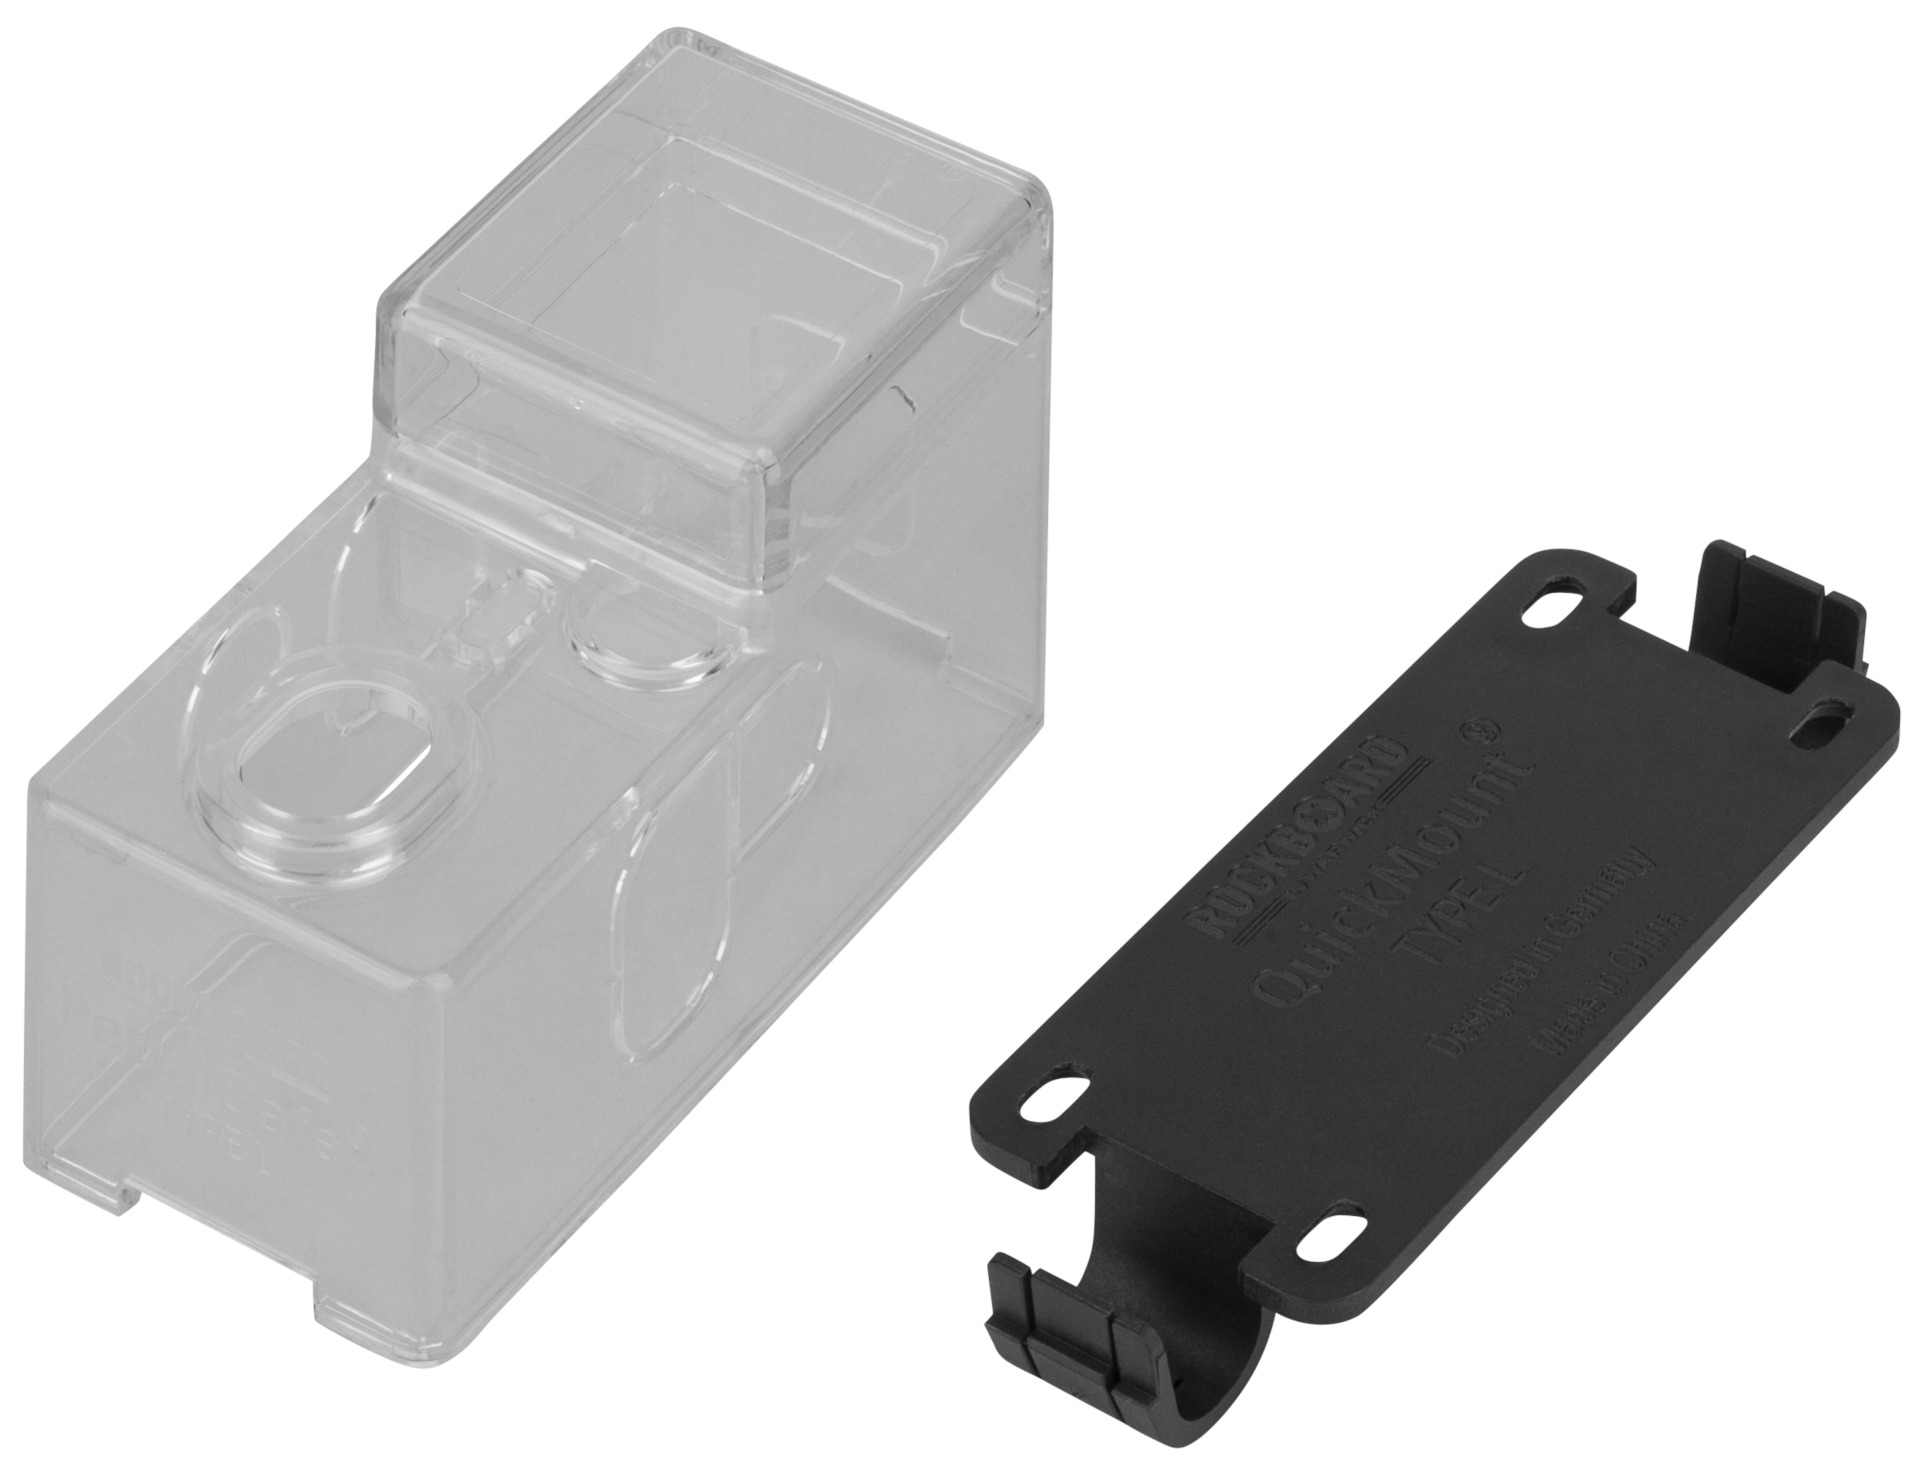 RockBoard PedalSafe Type L - Protective Cover And RockBoard Mounting Plate For Standard Mini Pedals